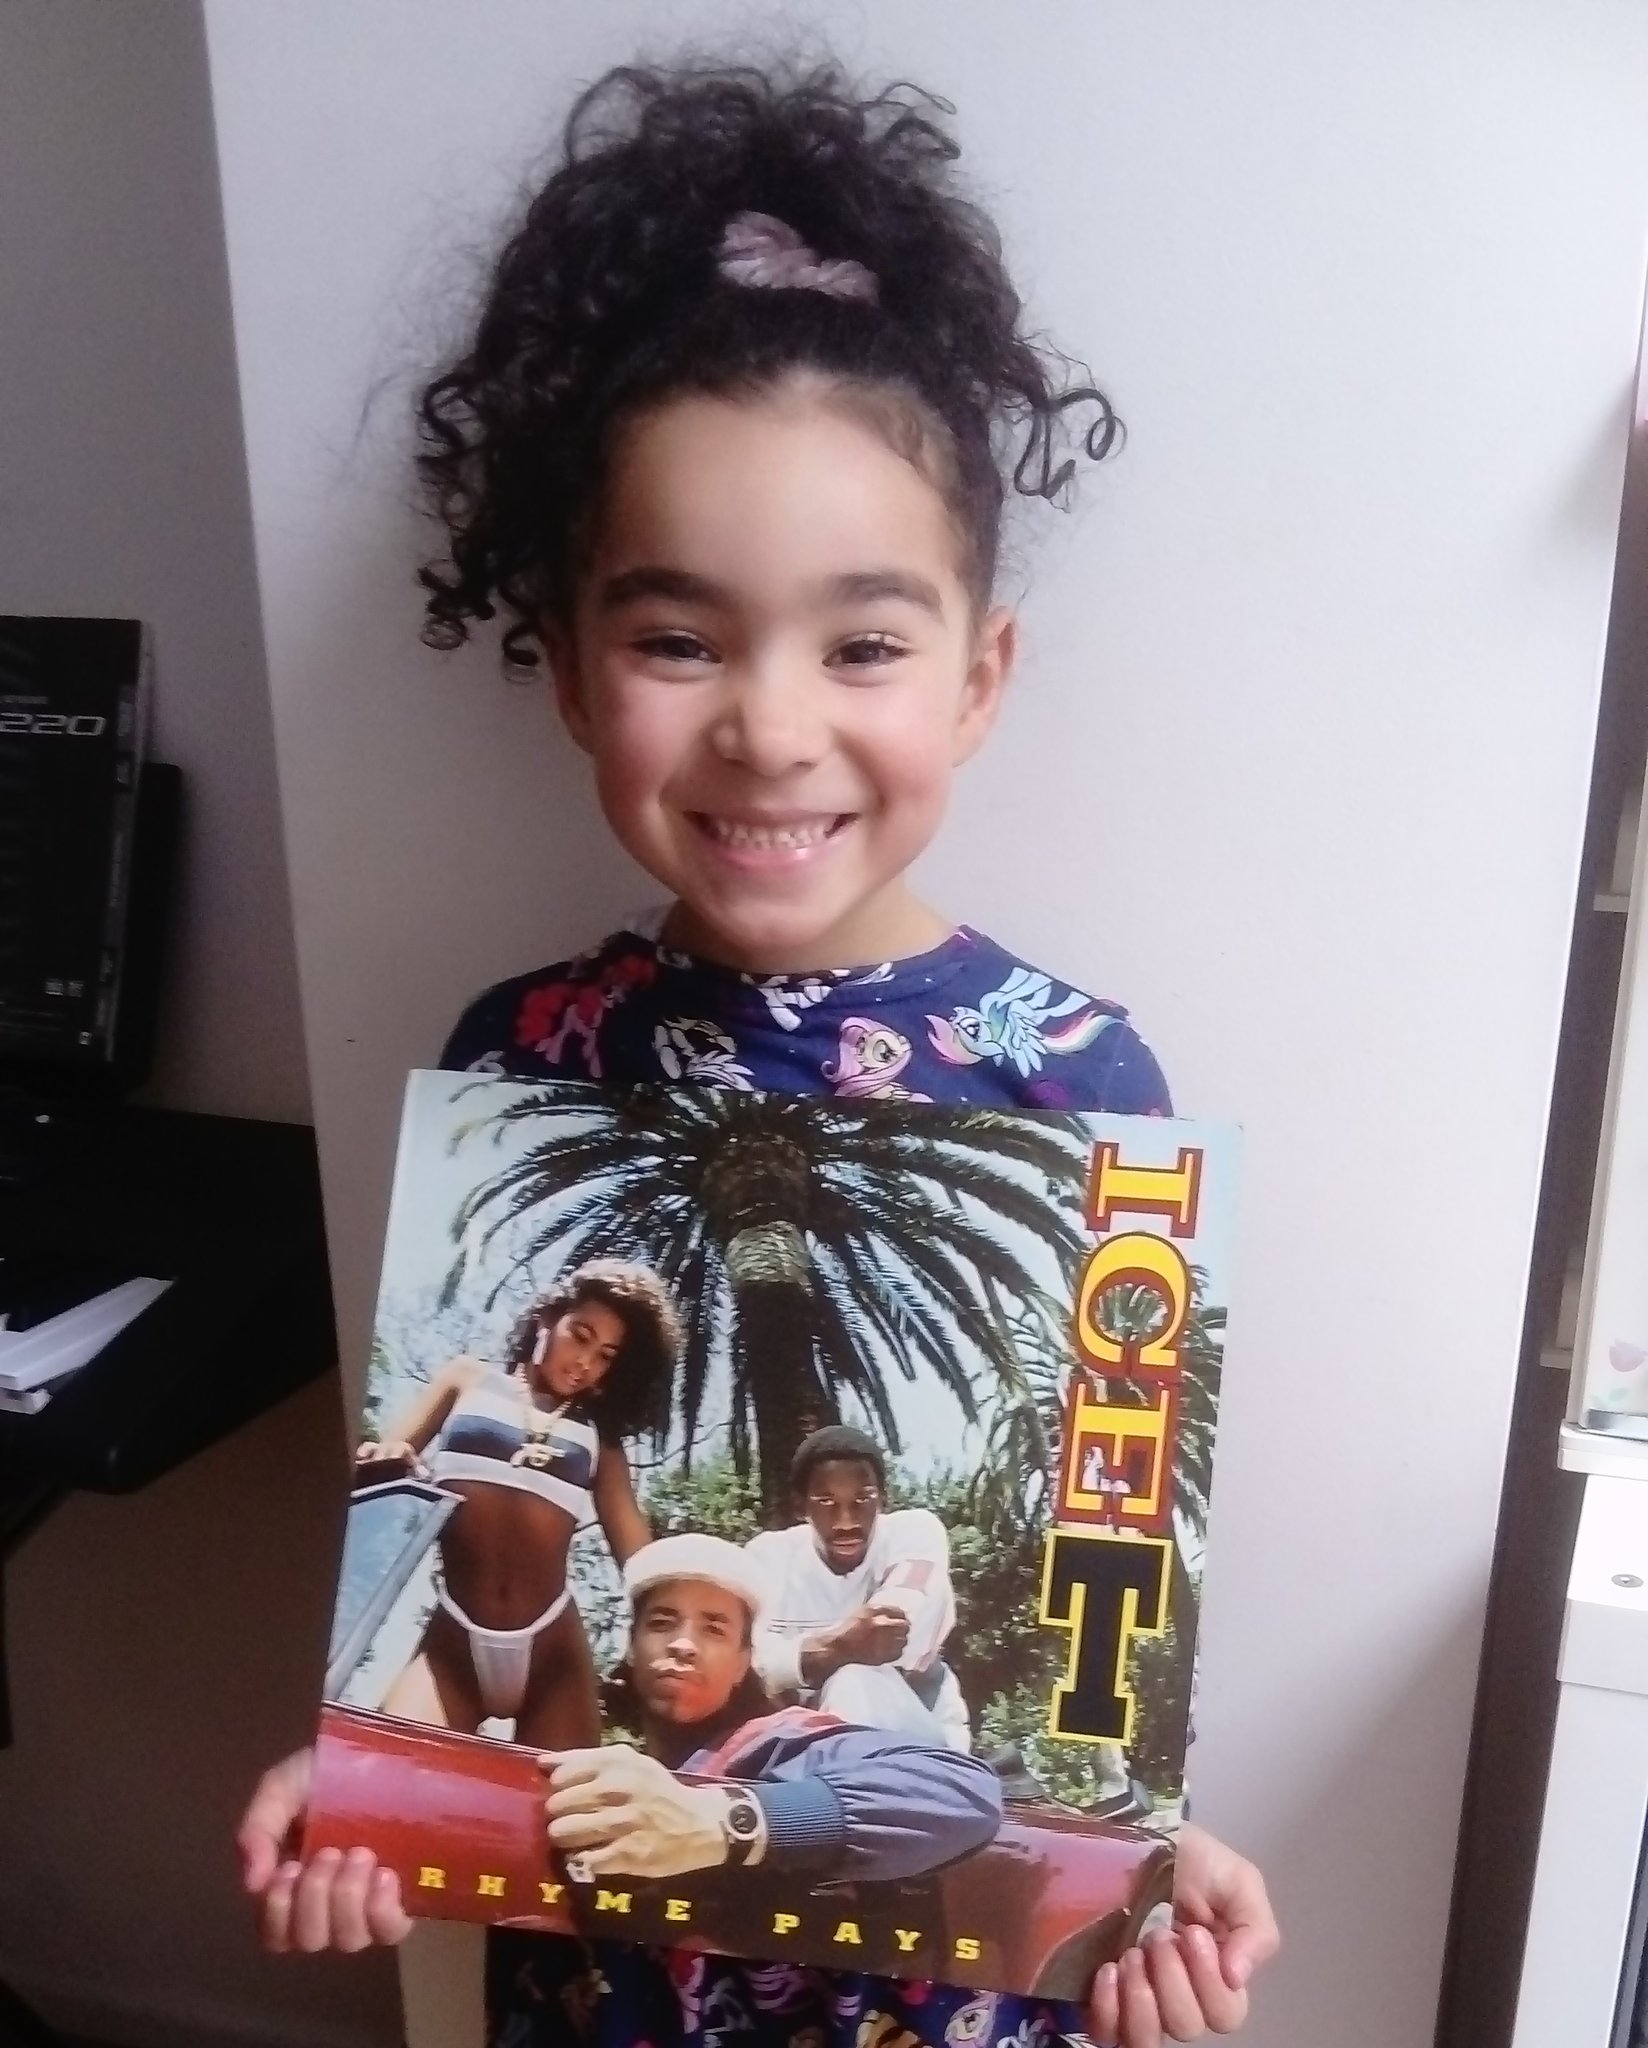 Happy 60th Bday to the OG Ice T... Absolute legend. My daughter rocking the Rhyme Pays classic. 